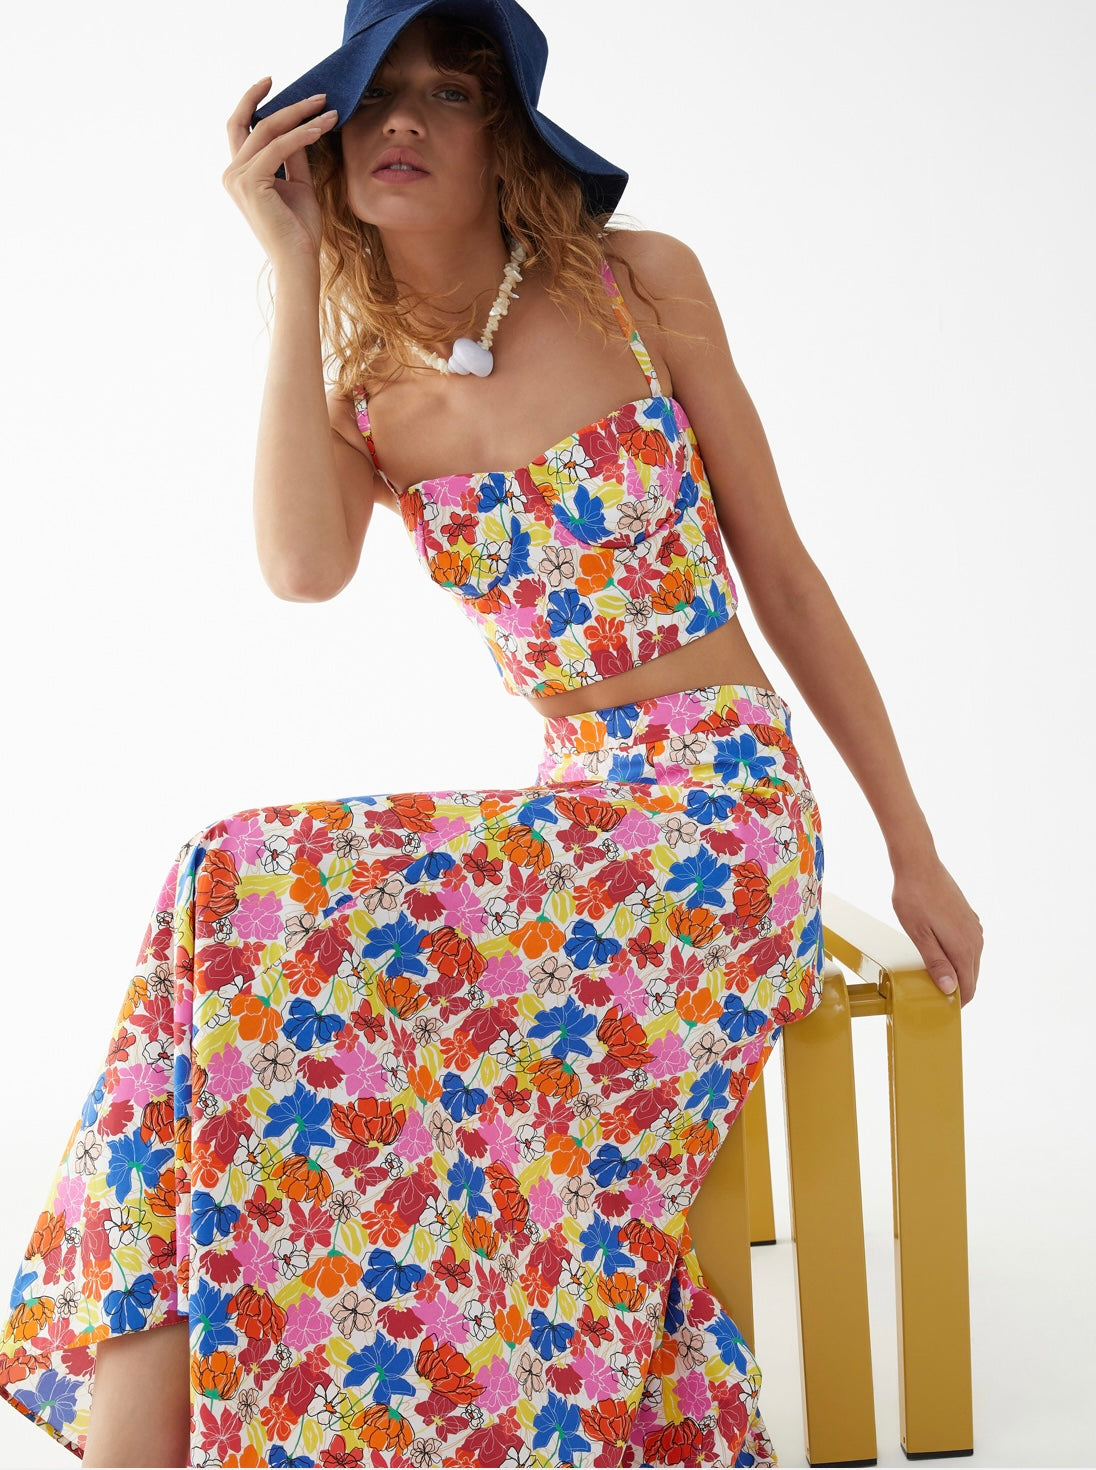 Floral Fit and Flare Skirt In Poplin Cotton